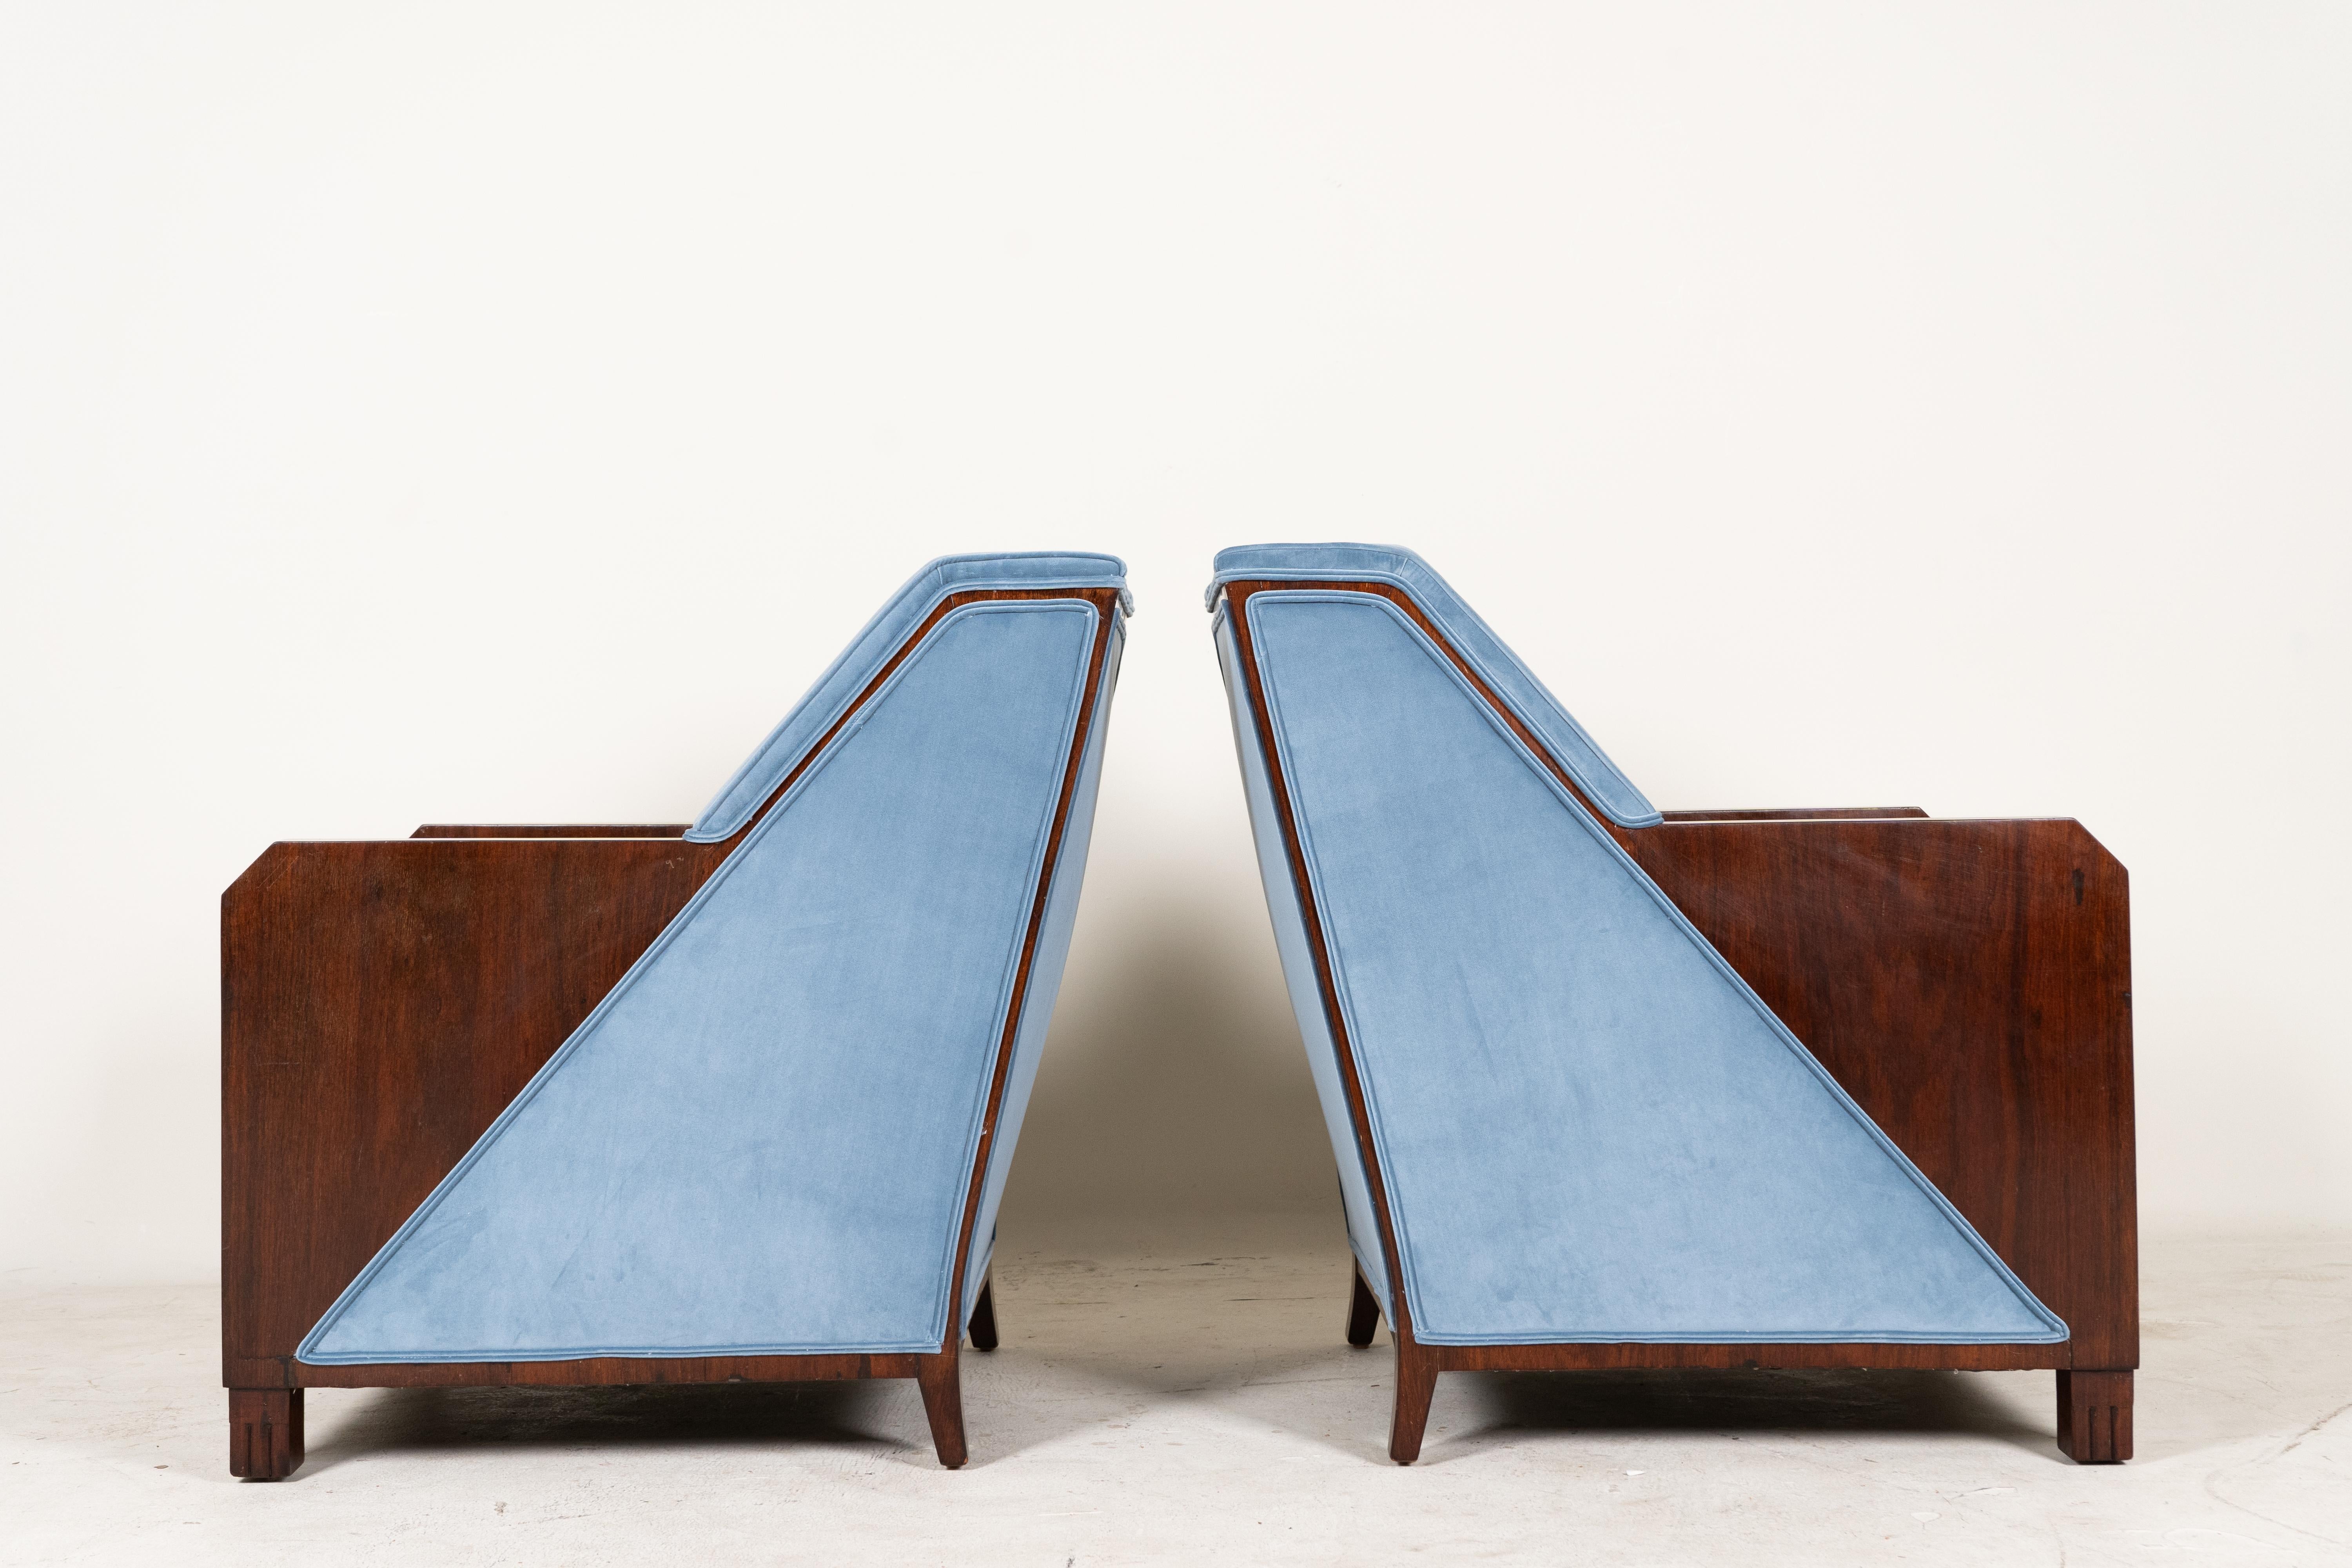 A Pair of Art Deco Lounge Chairs by Maison Dominique  In Good Condition For Sale In Chicago, IL